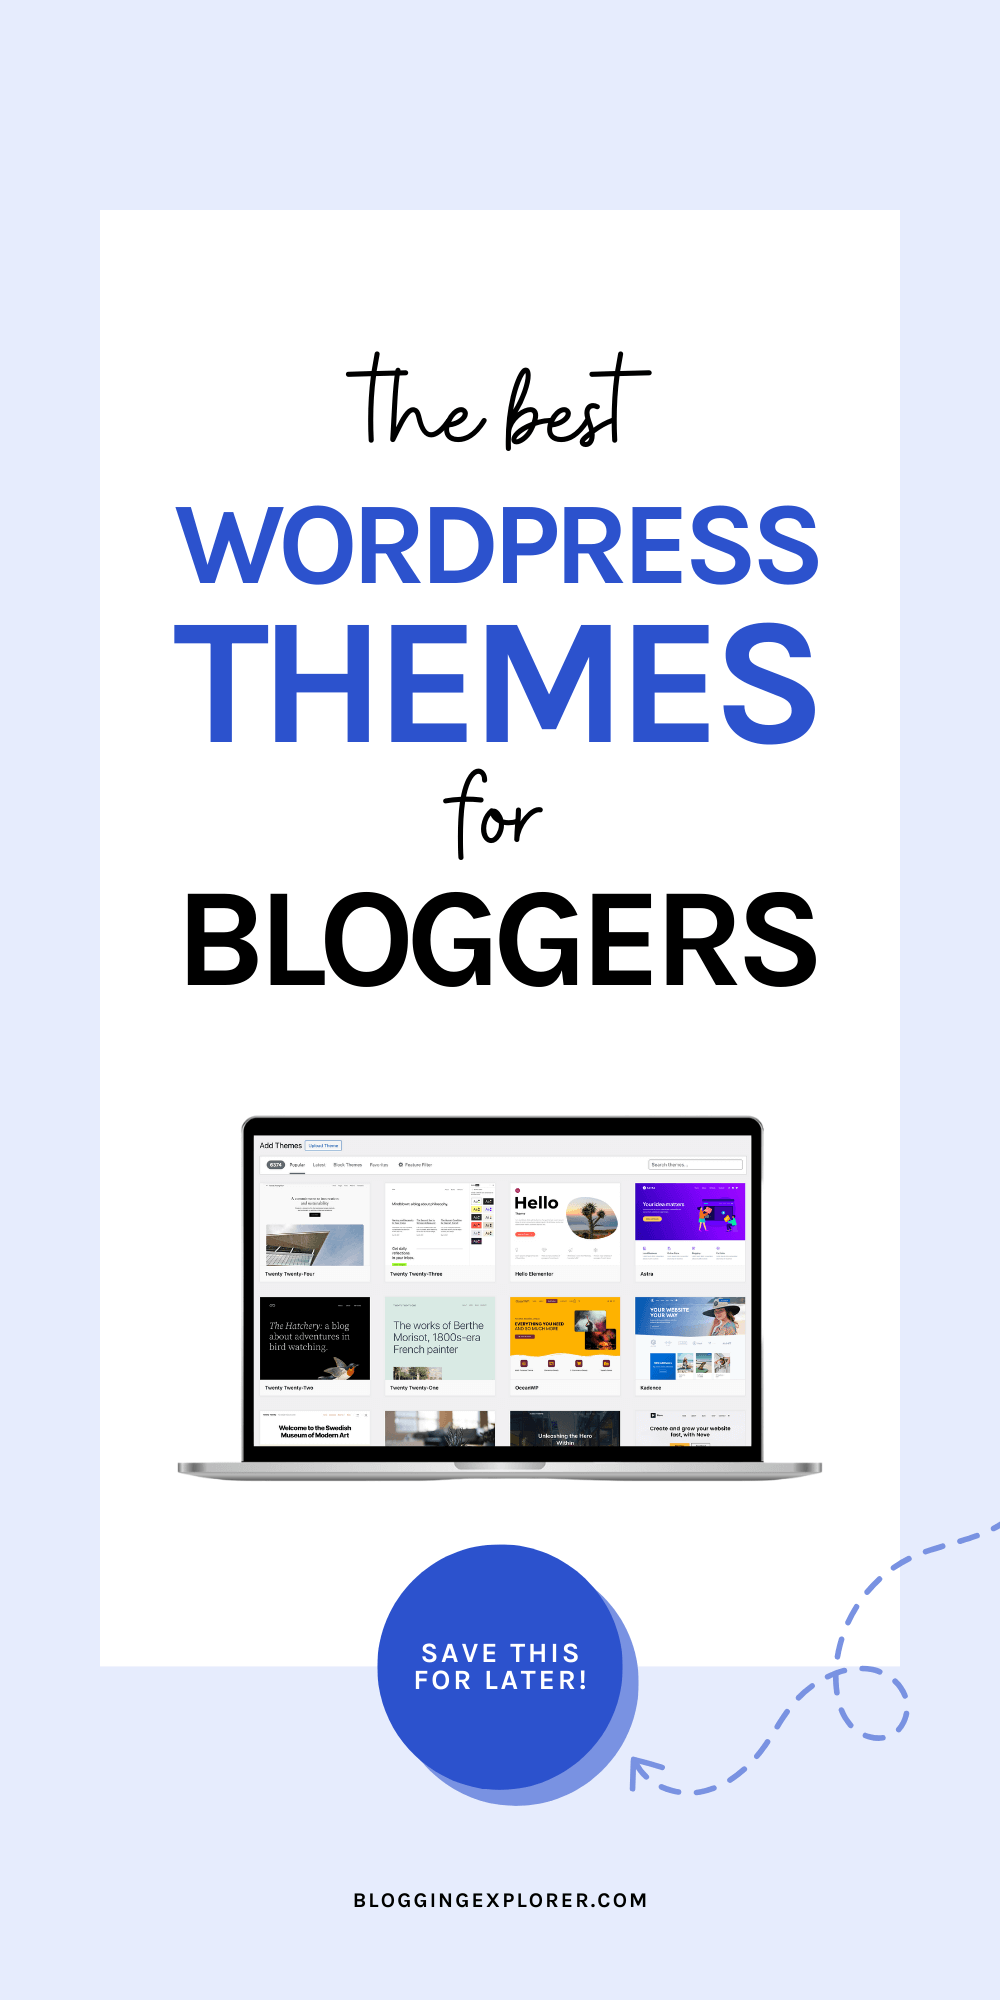 The best WordPress themes for bloggers